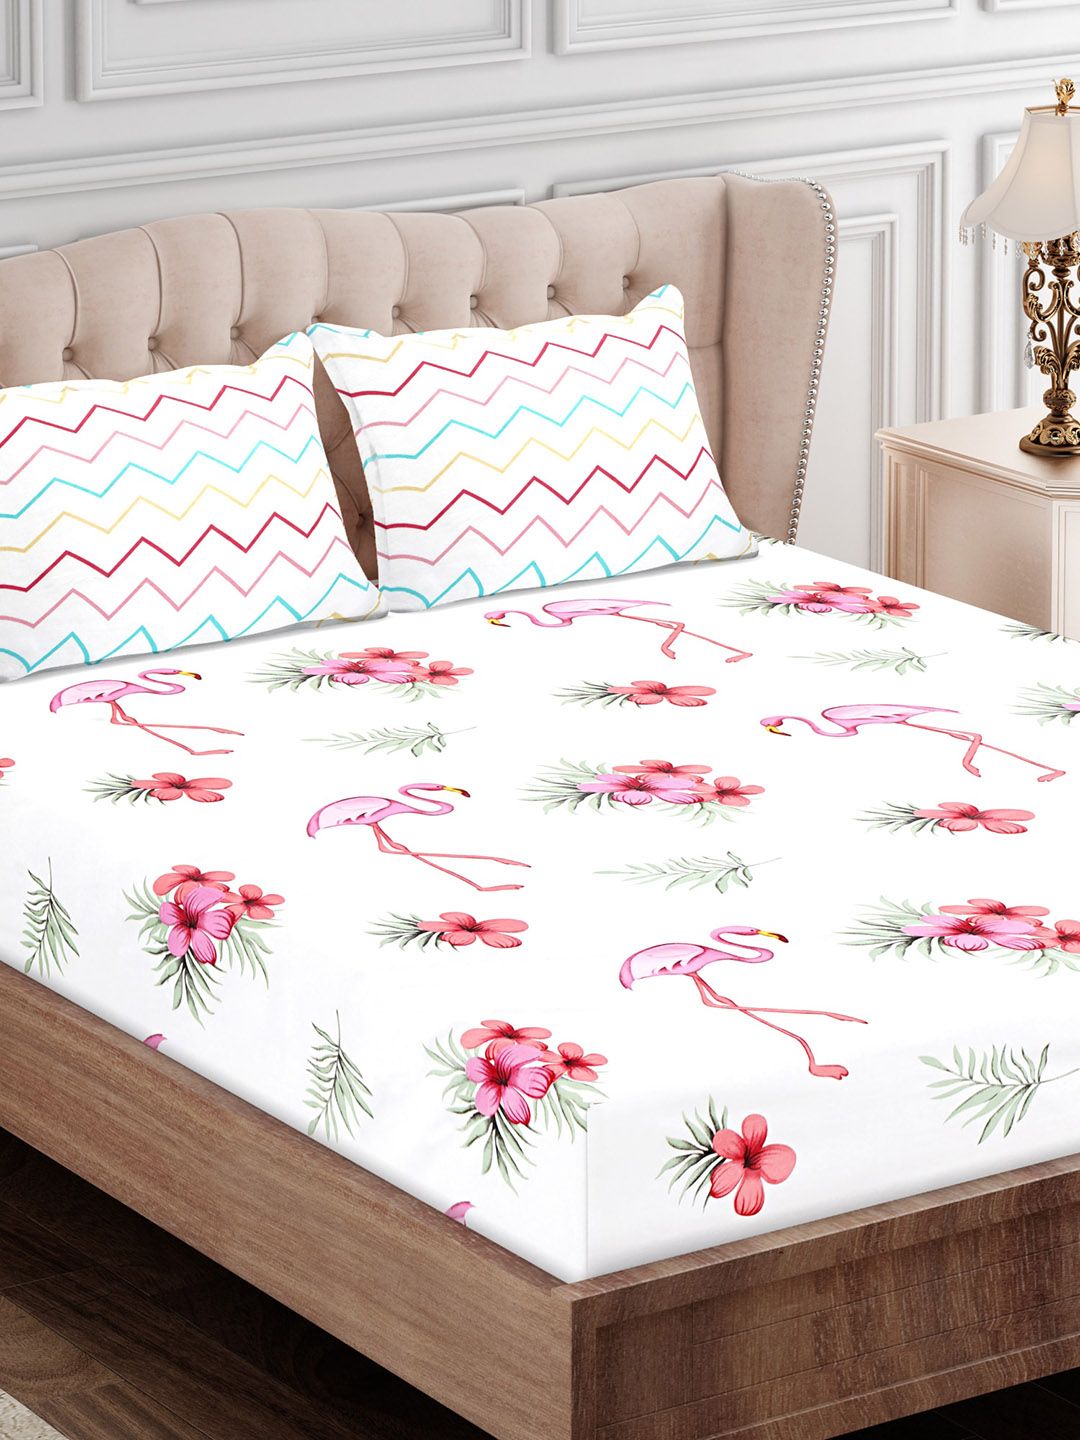 SEJ by Nisha Gupta Pink & Off White Floral 180 TC King Bedsheet with 2 Pillow Covers Price in India